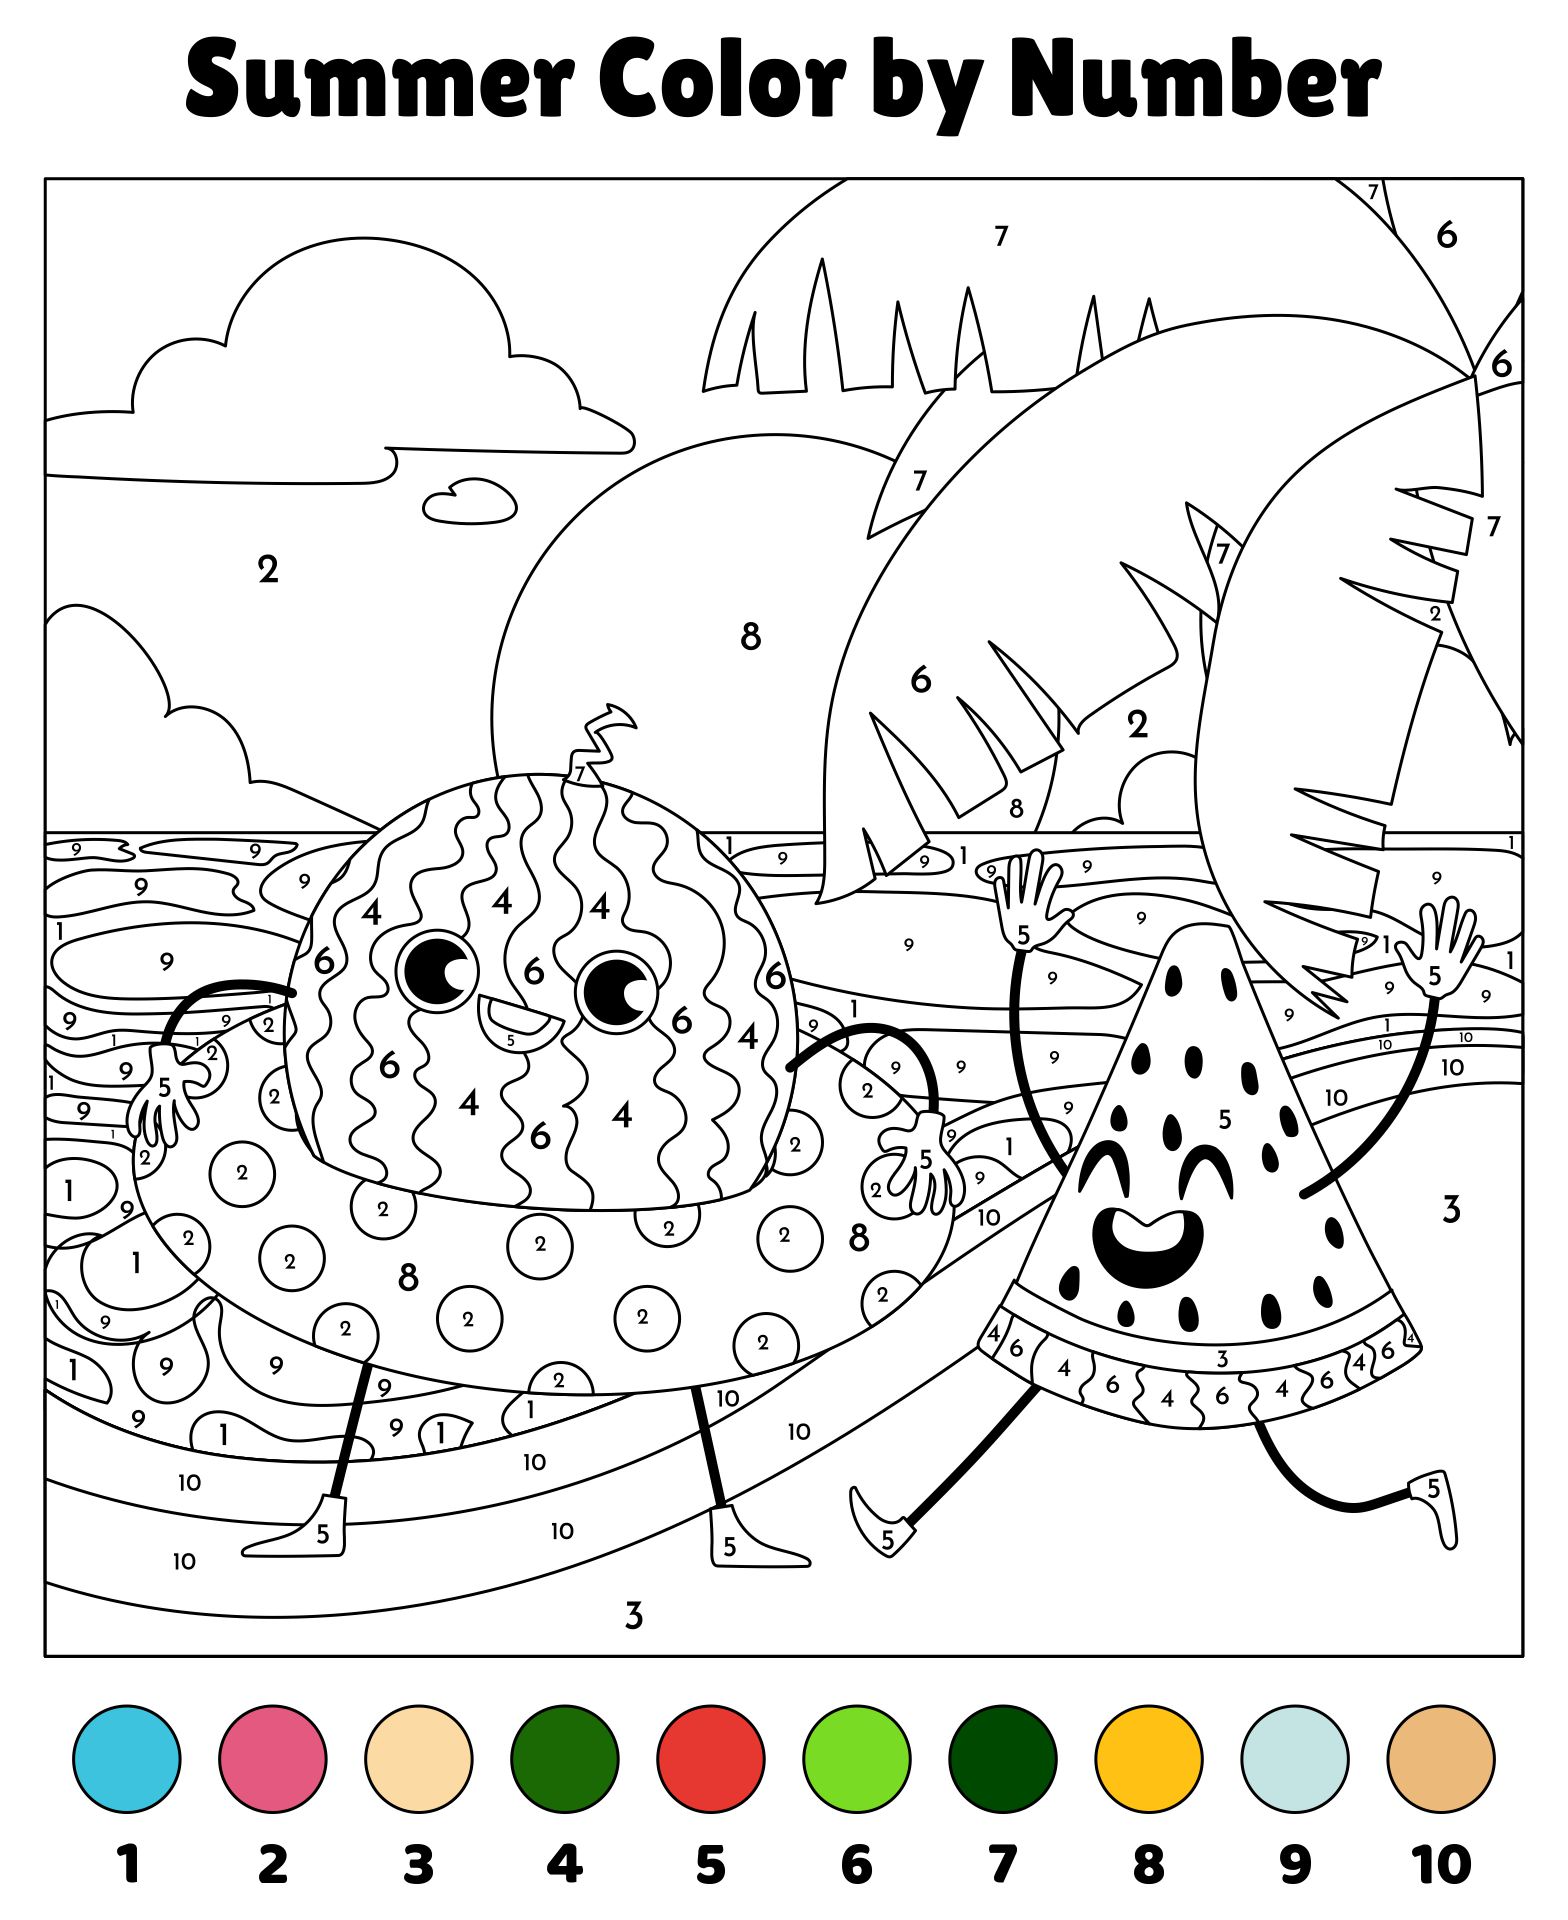 5-best-images-of-summer-printables-color-worksheets-summer-fun-coloring-book-pages-summer